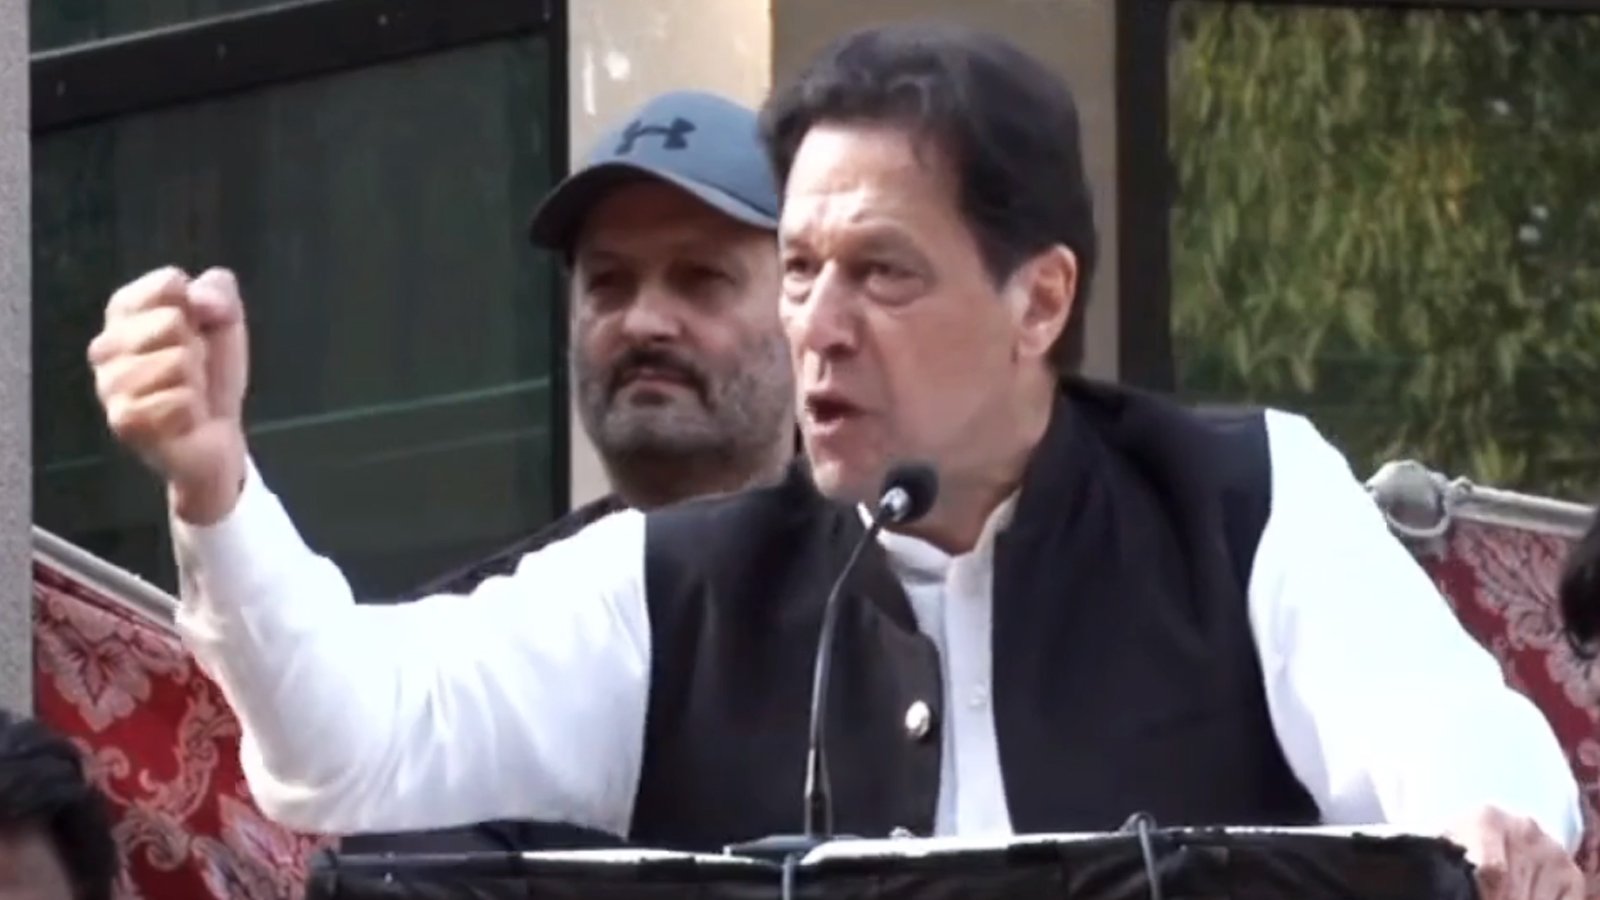 Pakistan Tehreek-e-Insaf (PTI) Chairman Imran Khan addressing party workers at Zaman Park, Lahore on March 5, 2023, in this still taken from a video. — YouTube/Facebook/ImranKhan